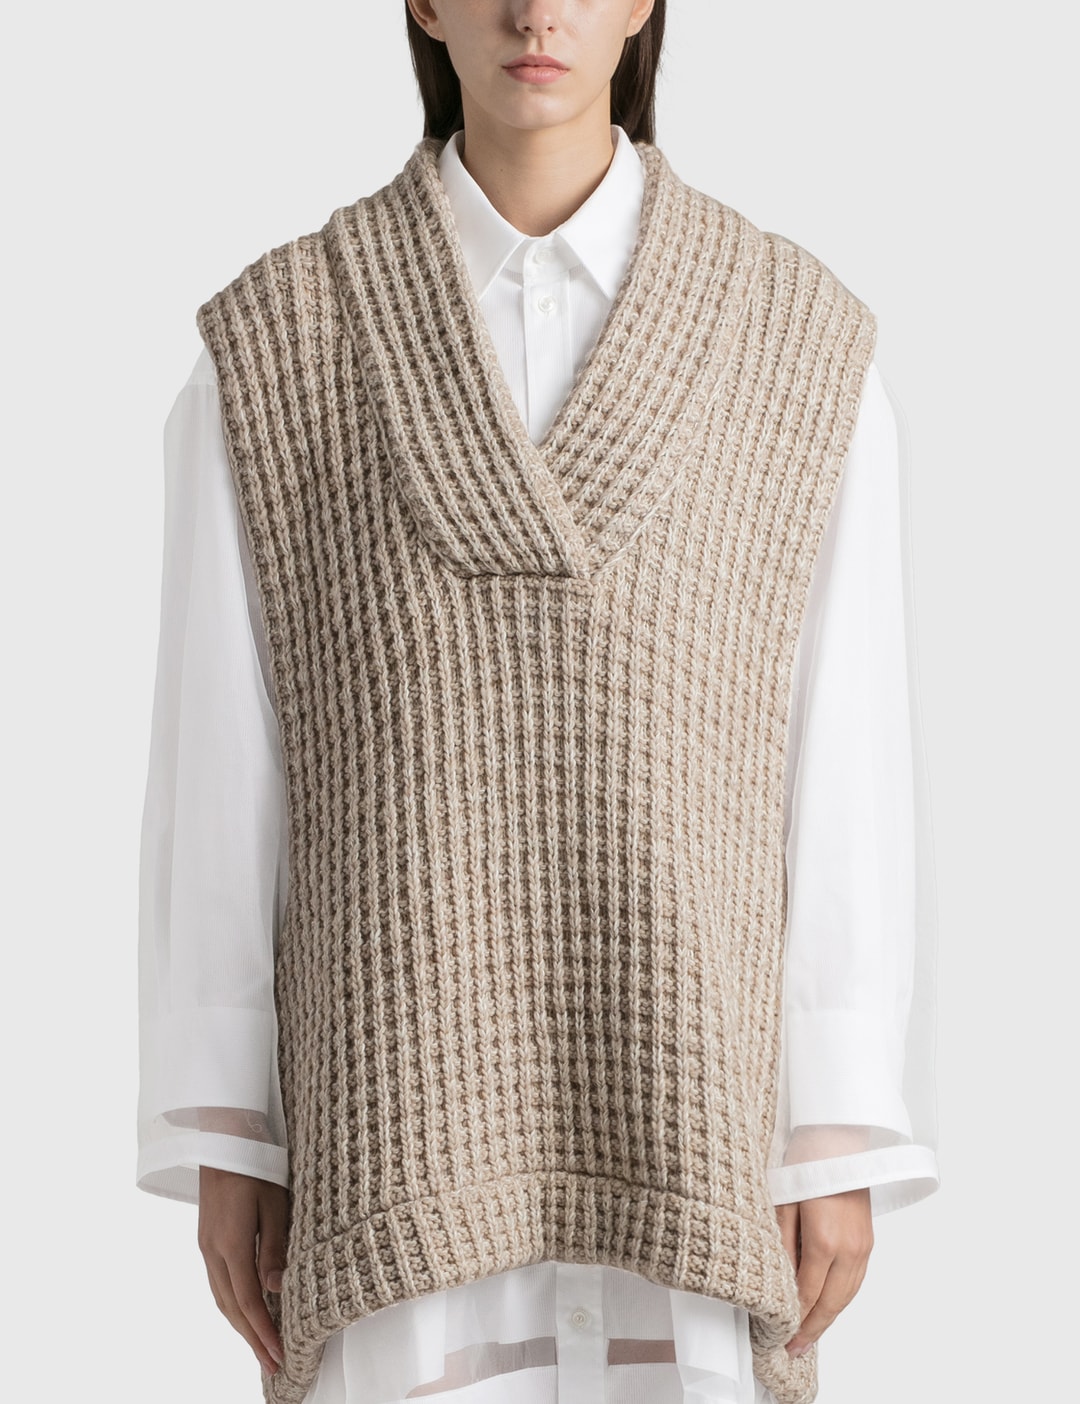 MM6 Margiela - Oversized Sweater Vest | HBX - Globally Curated Fashion and Lifestyle by Hypebeast